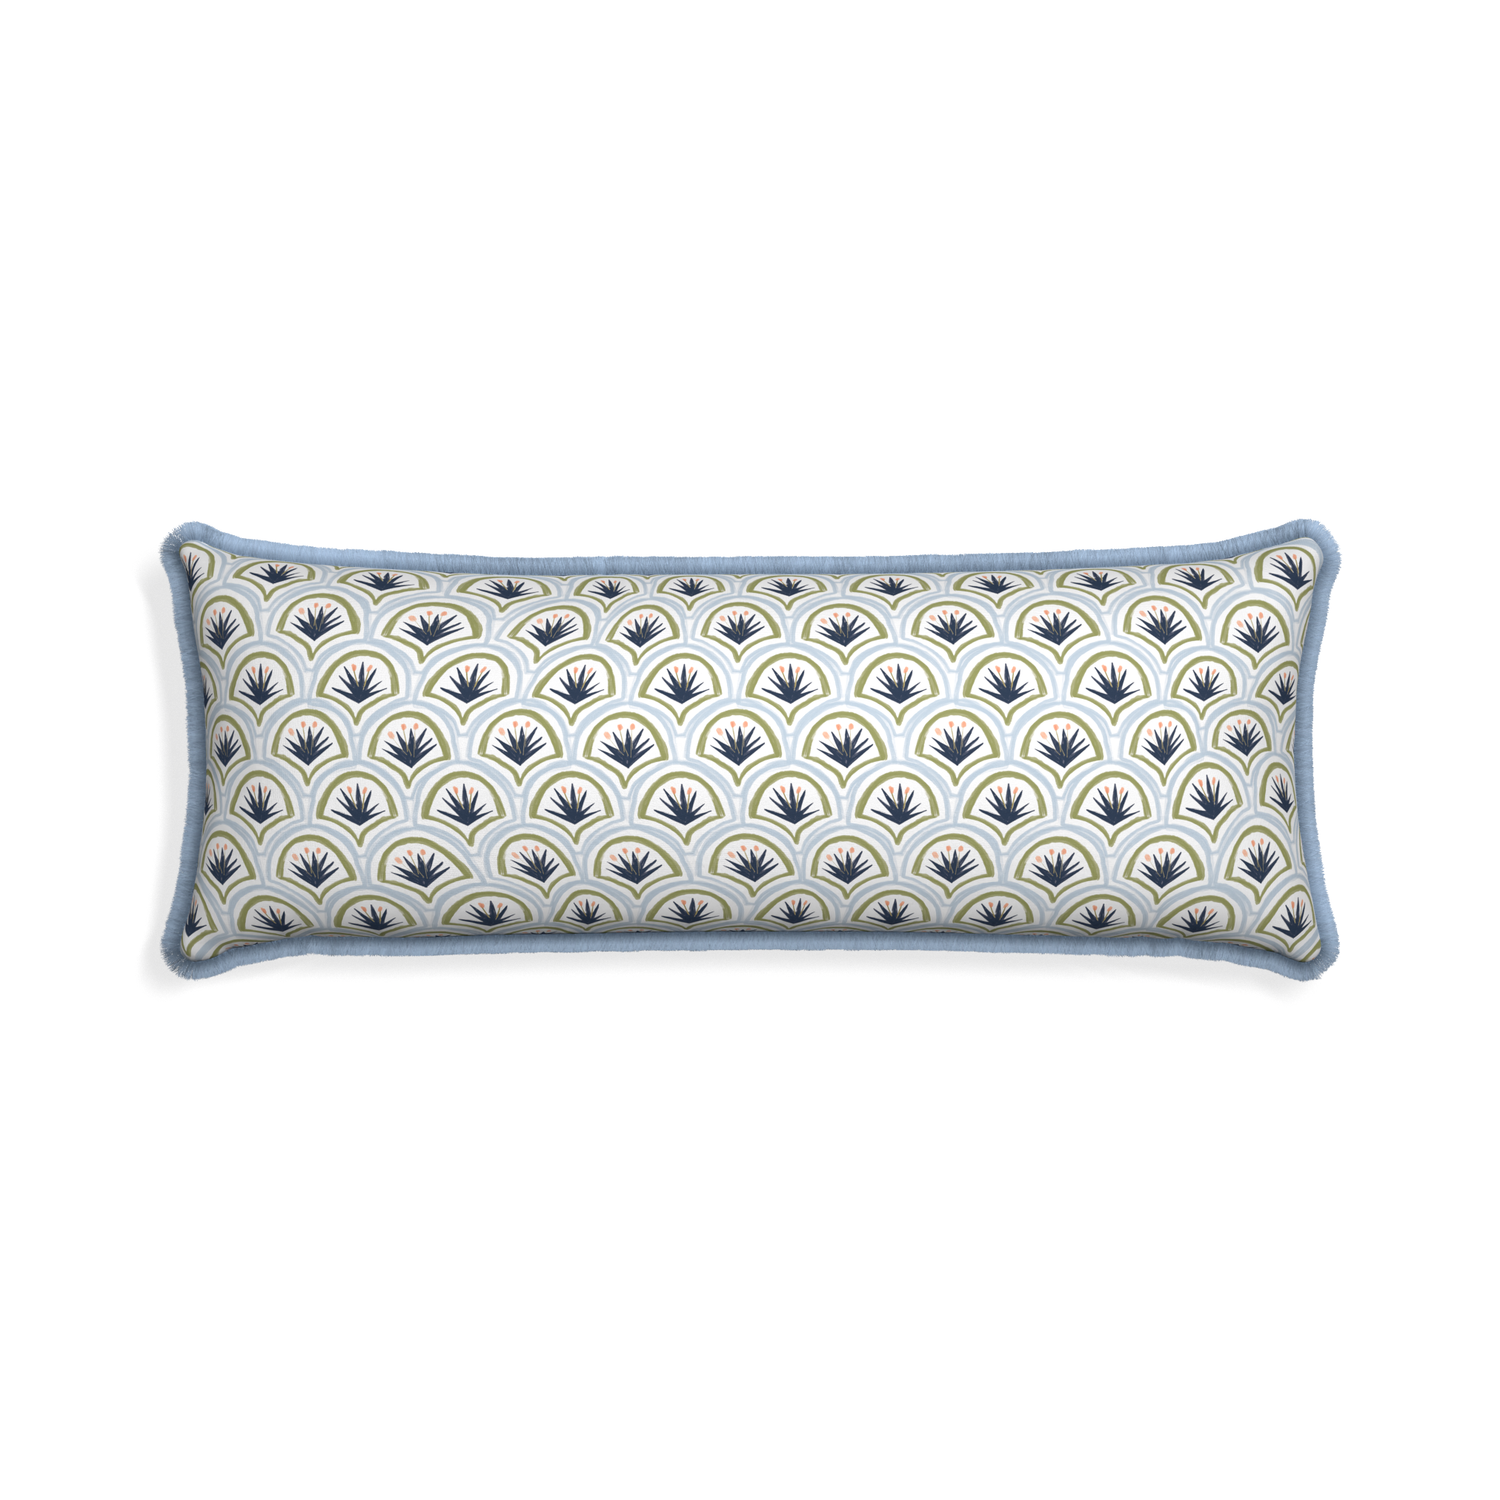 Xl-lumbar thatcher midnight custom art deco palm patternpillow with sky fringe on white background